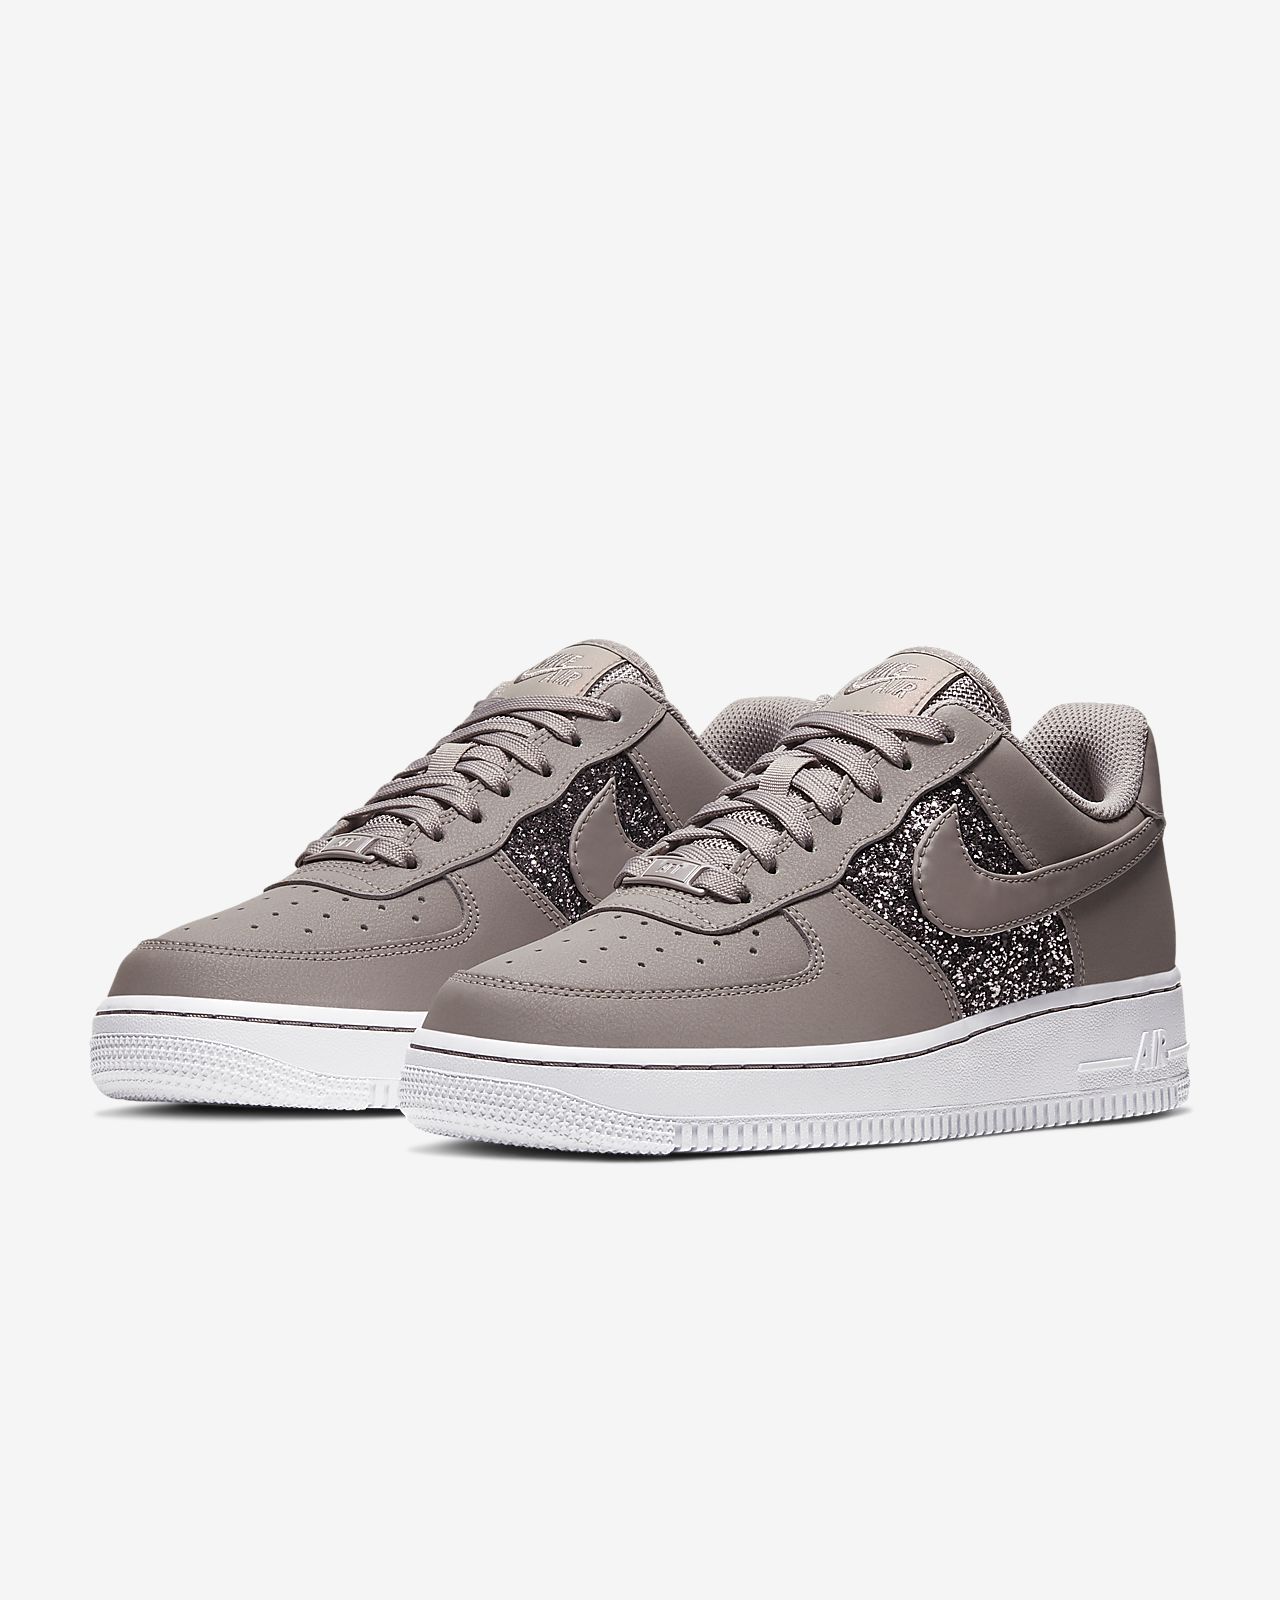 sparkle nike air force ones50% OFF Nike 